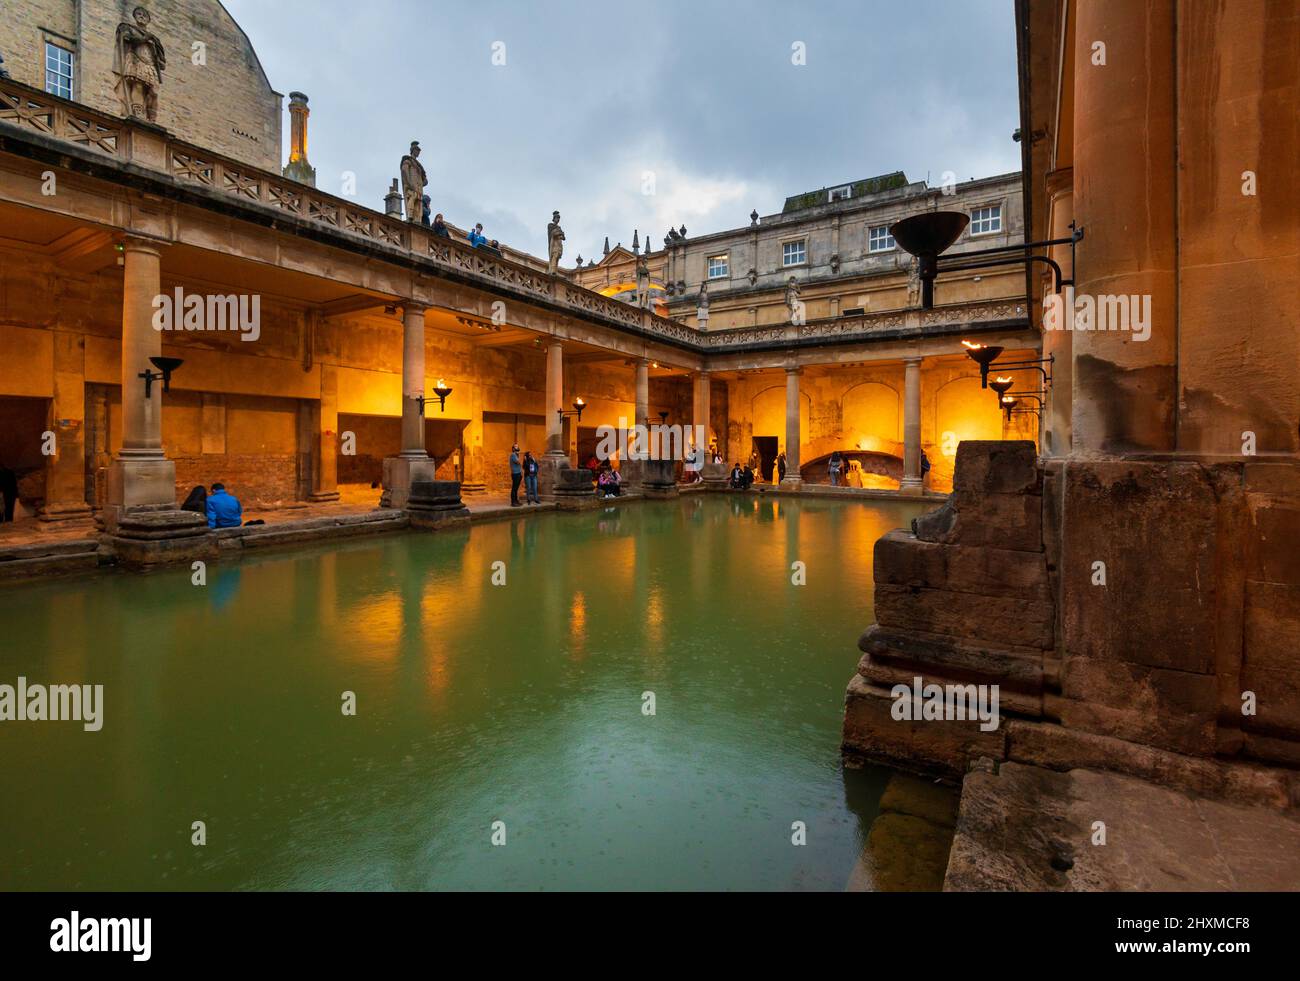 City of Bath, UK. 07-08-2021. Evening sightseeing of restored in Victorian times ancient Roman Baths in the light of wall sconces. Stock Photo